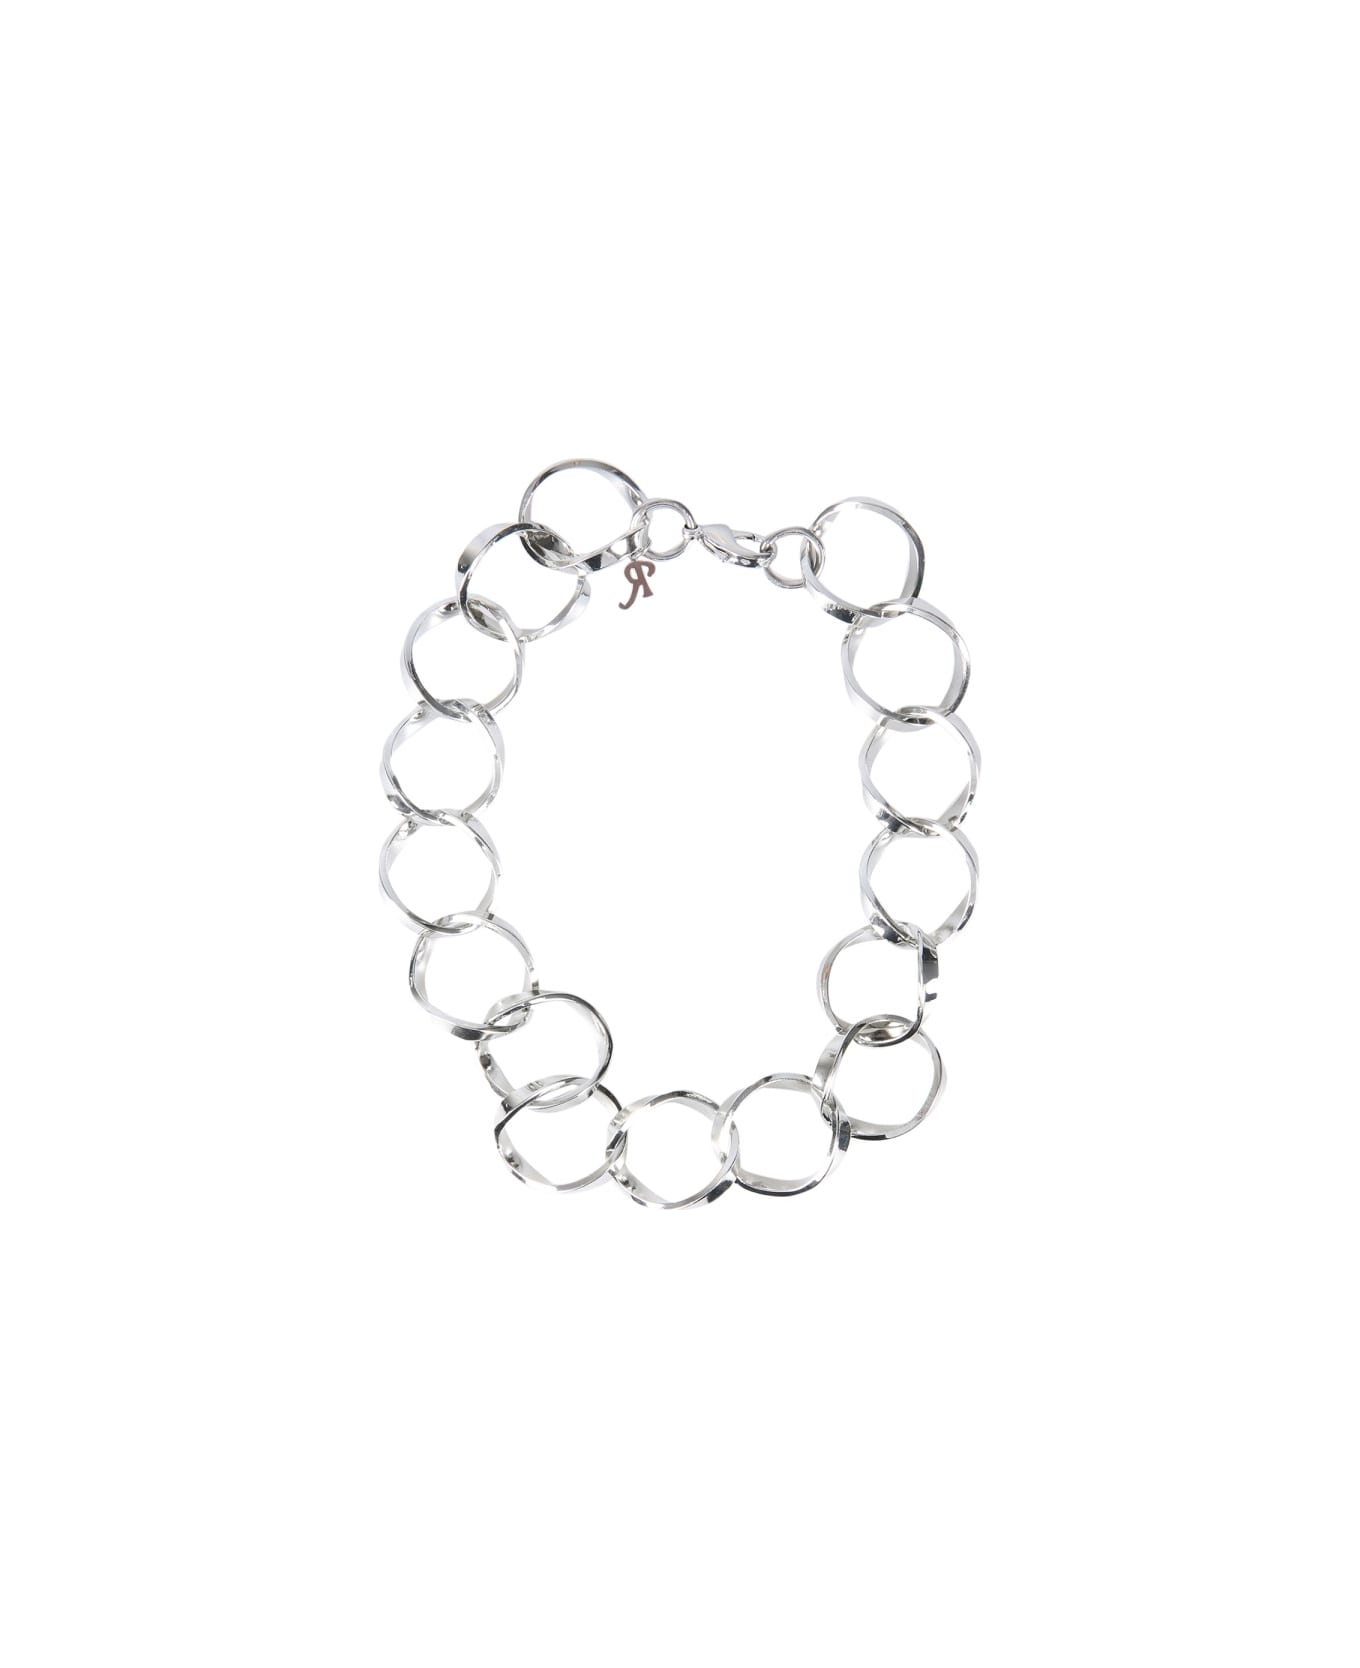 Raf Simons Linked Rings Necklace - SILVER